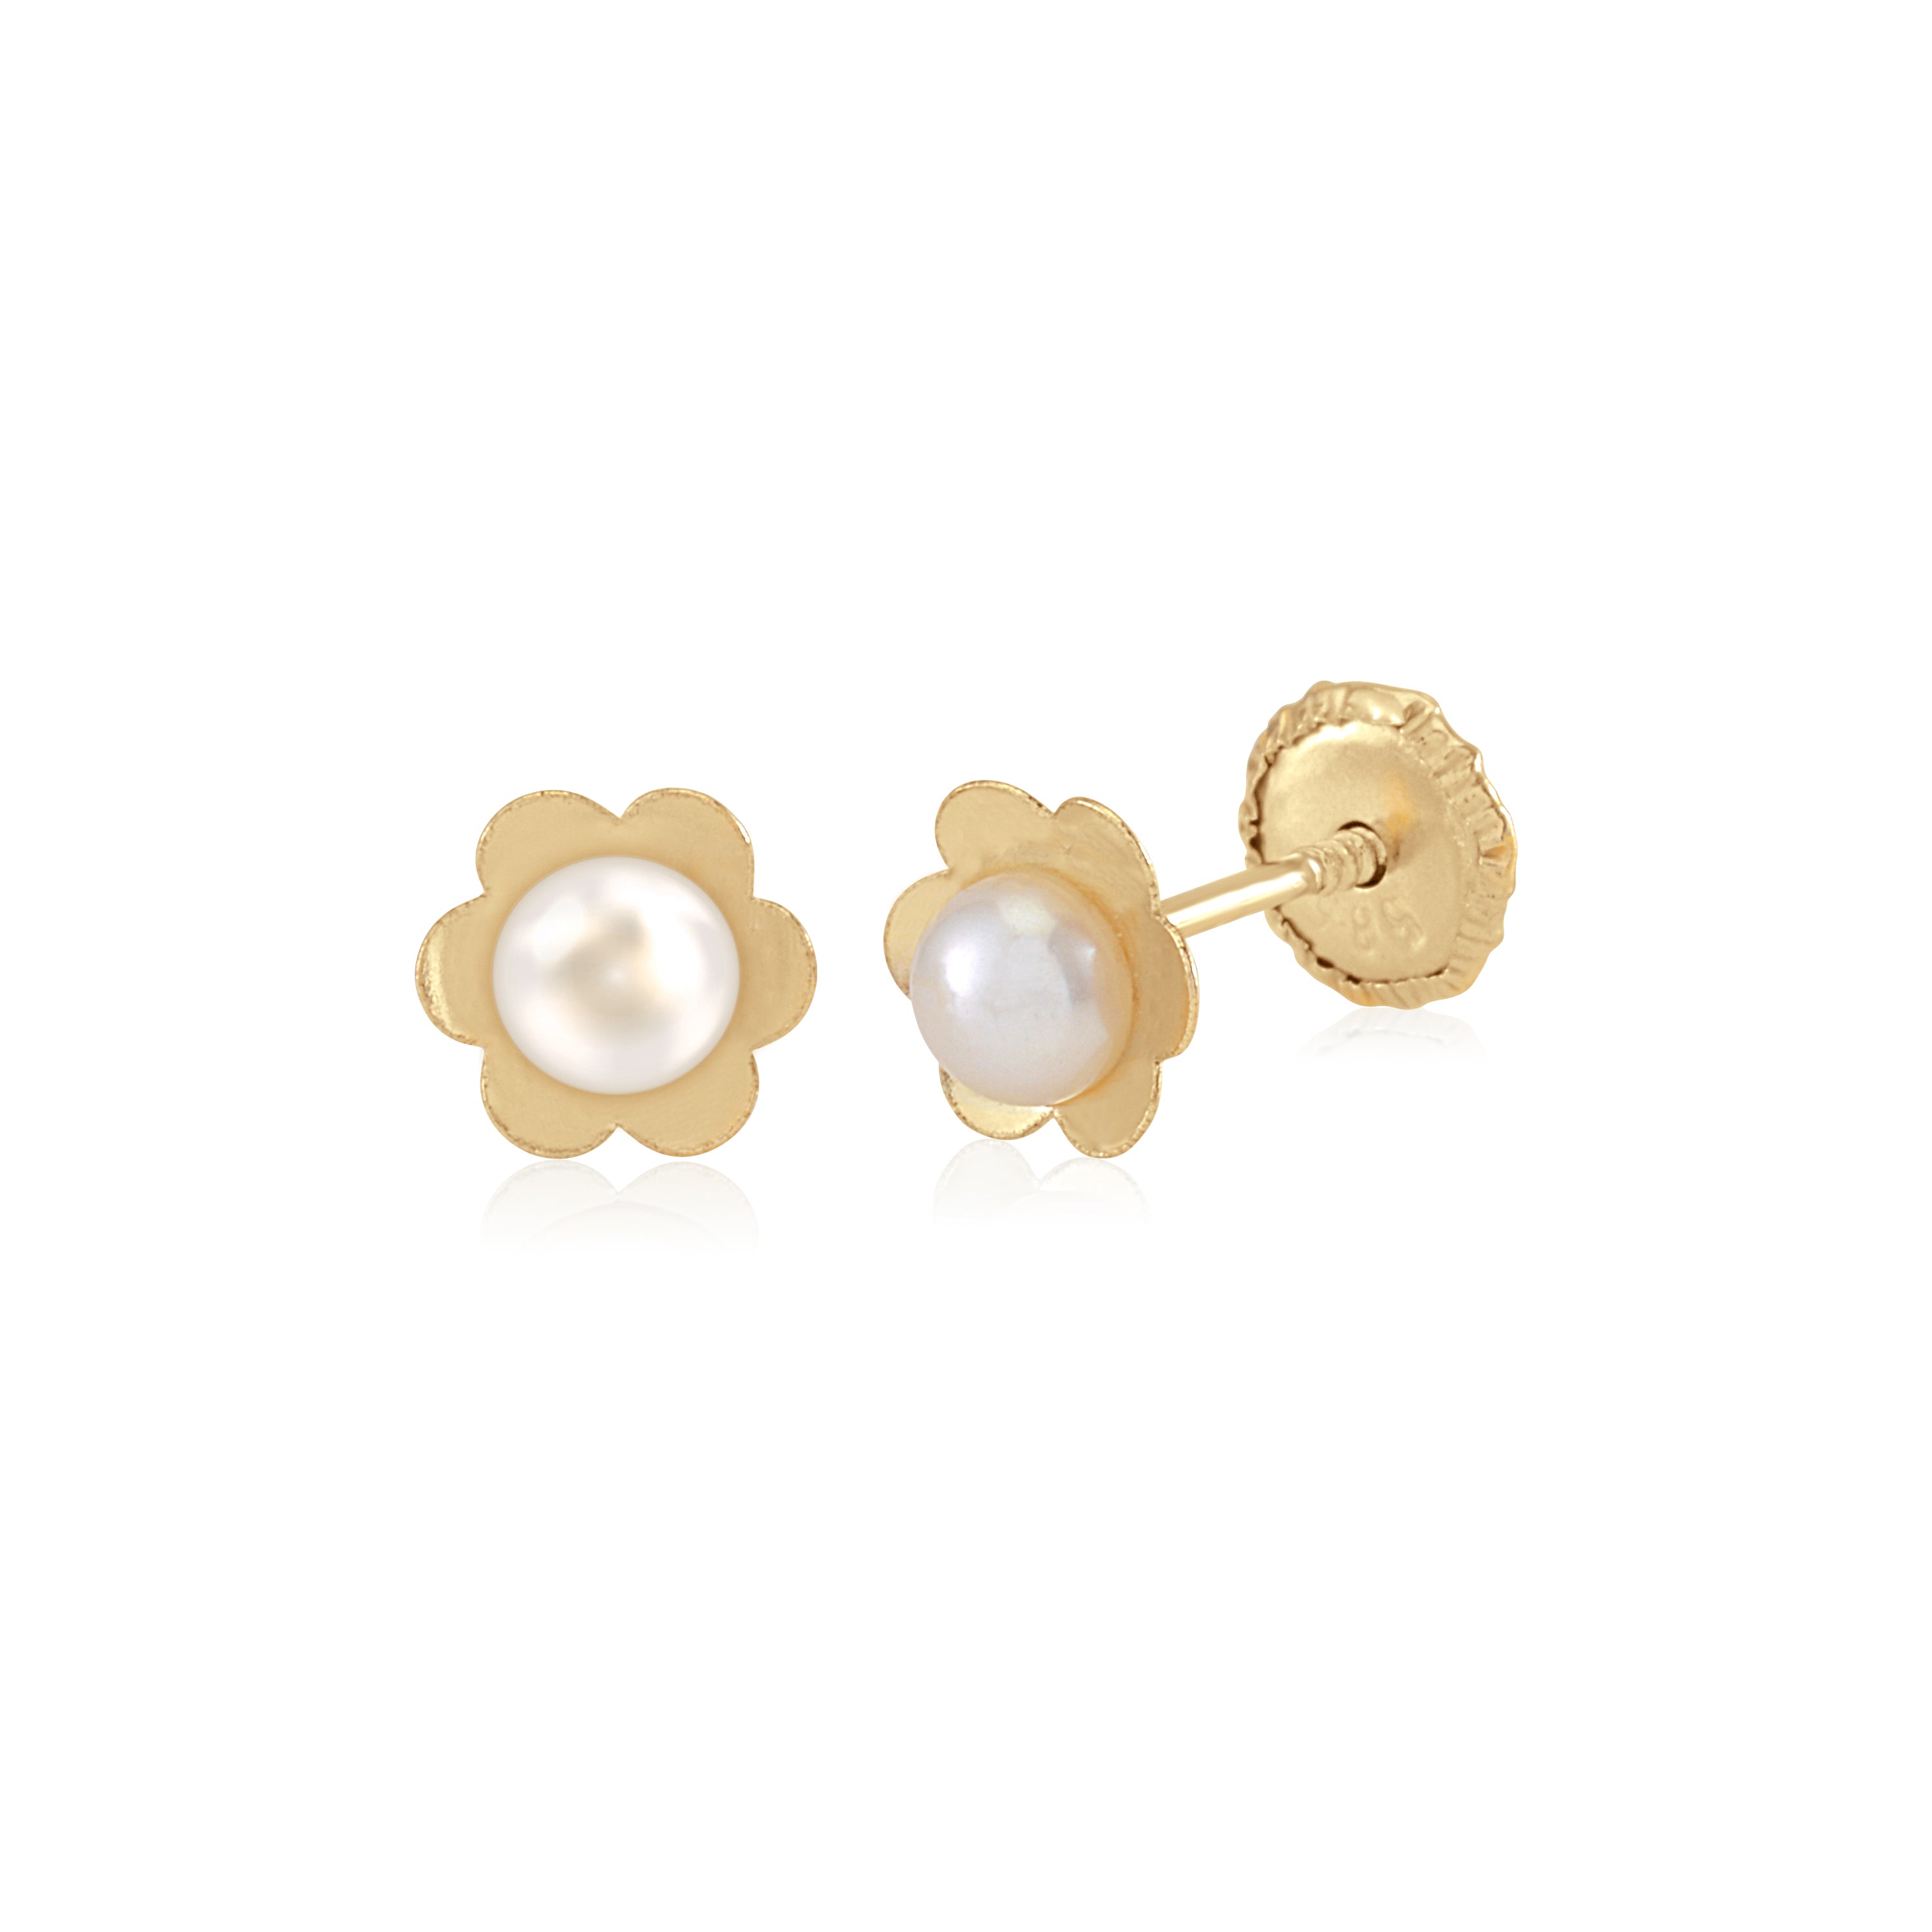 MASSETE 14k Yellow Gold Screwback Earrings Flower with Cultured Pearl for Baby and Children